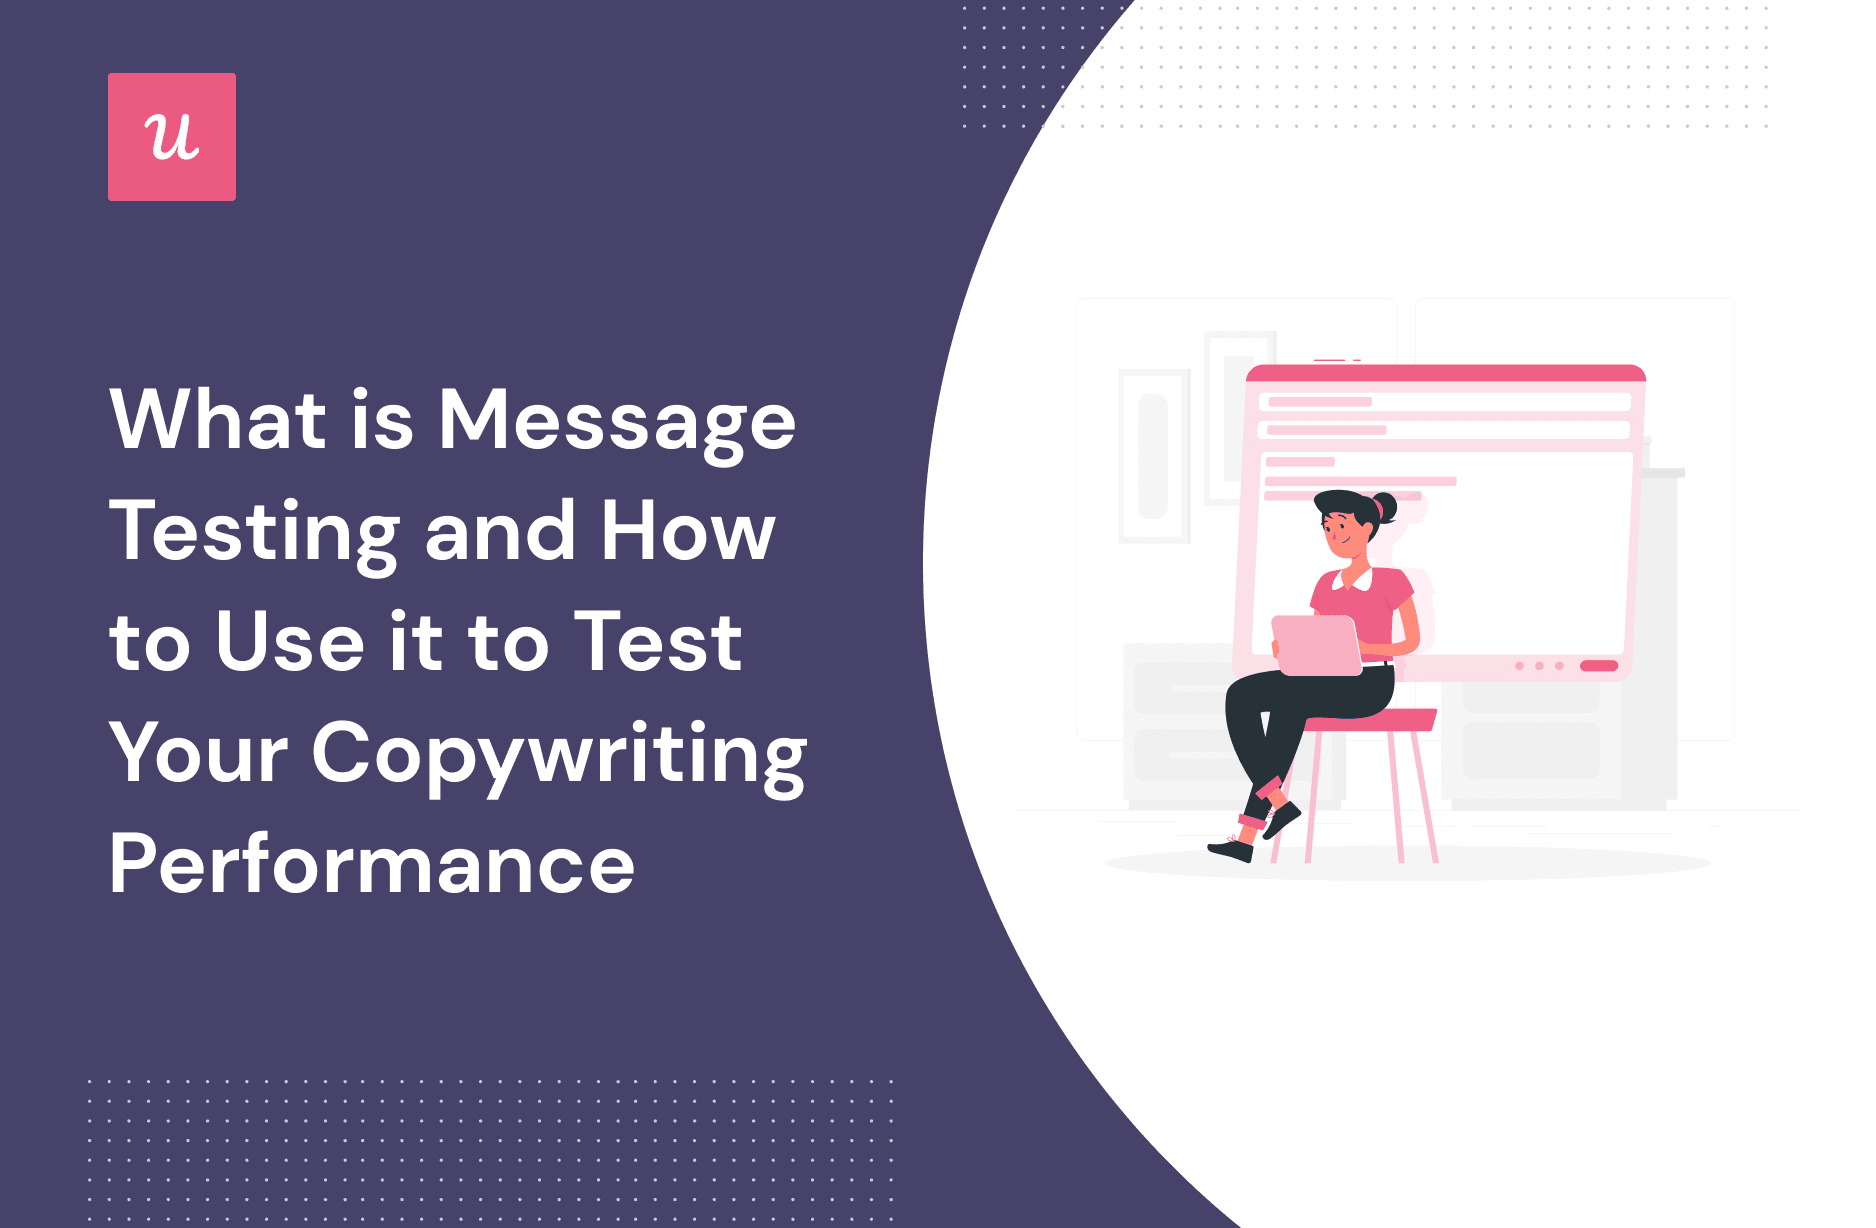 What is Message Testing and How to Use it to Test Your Copywriting Performance?